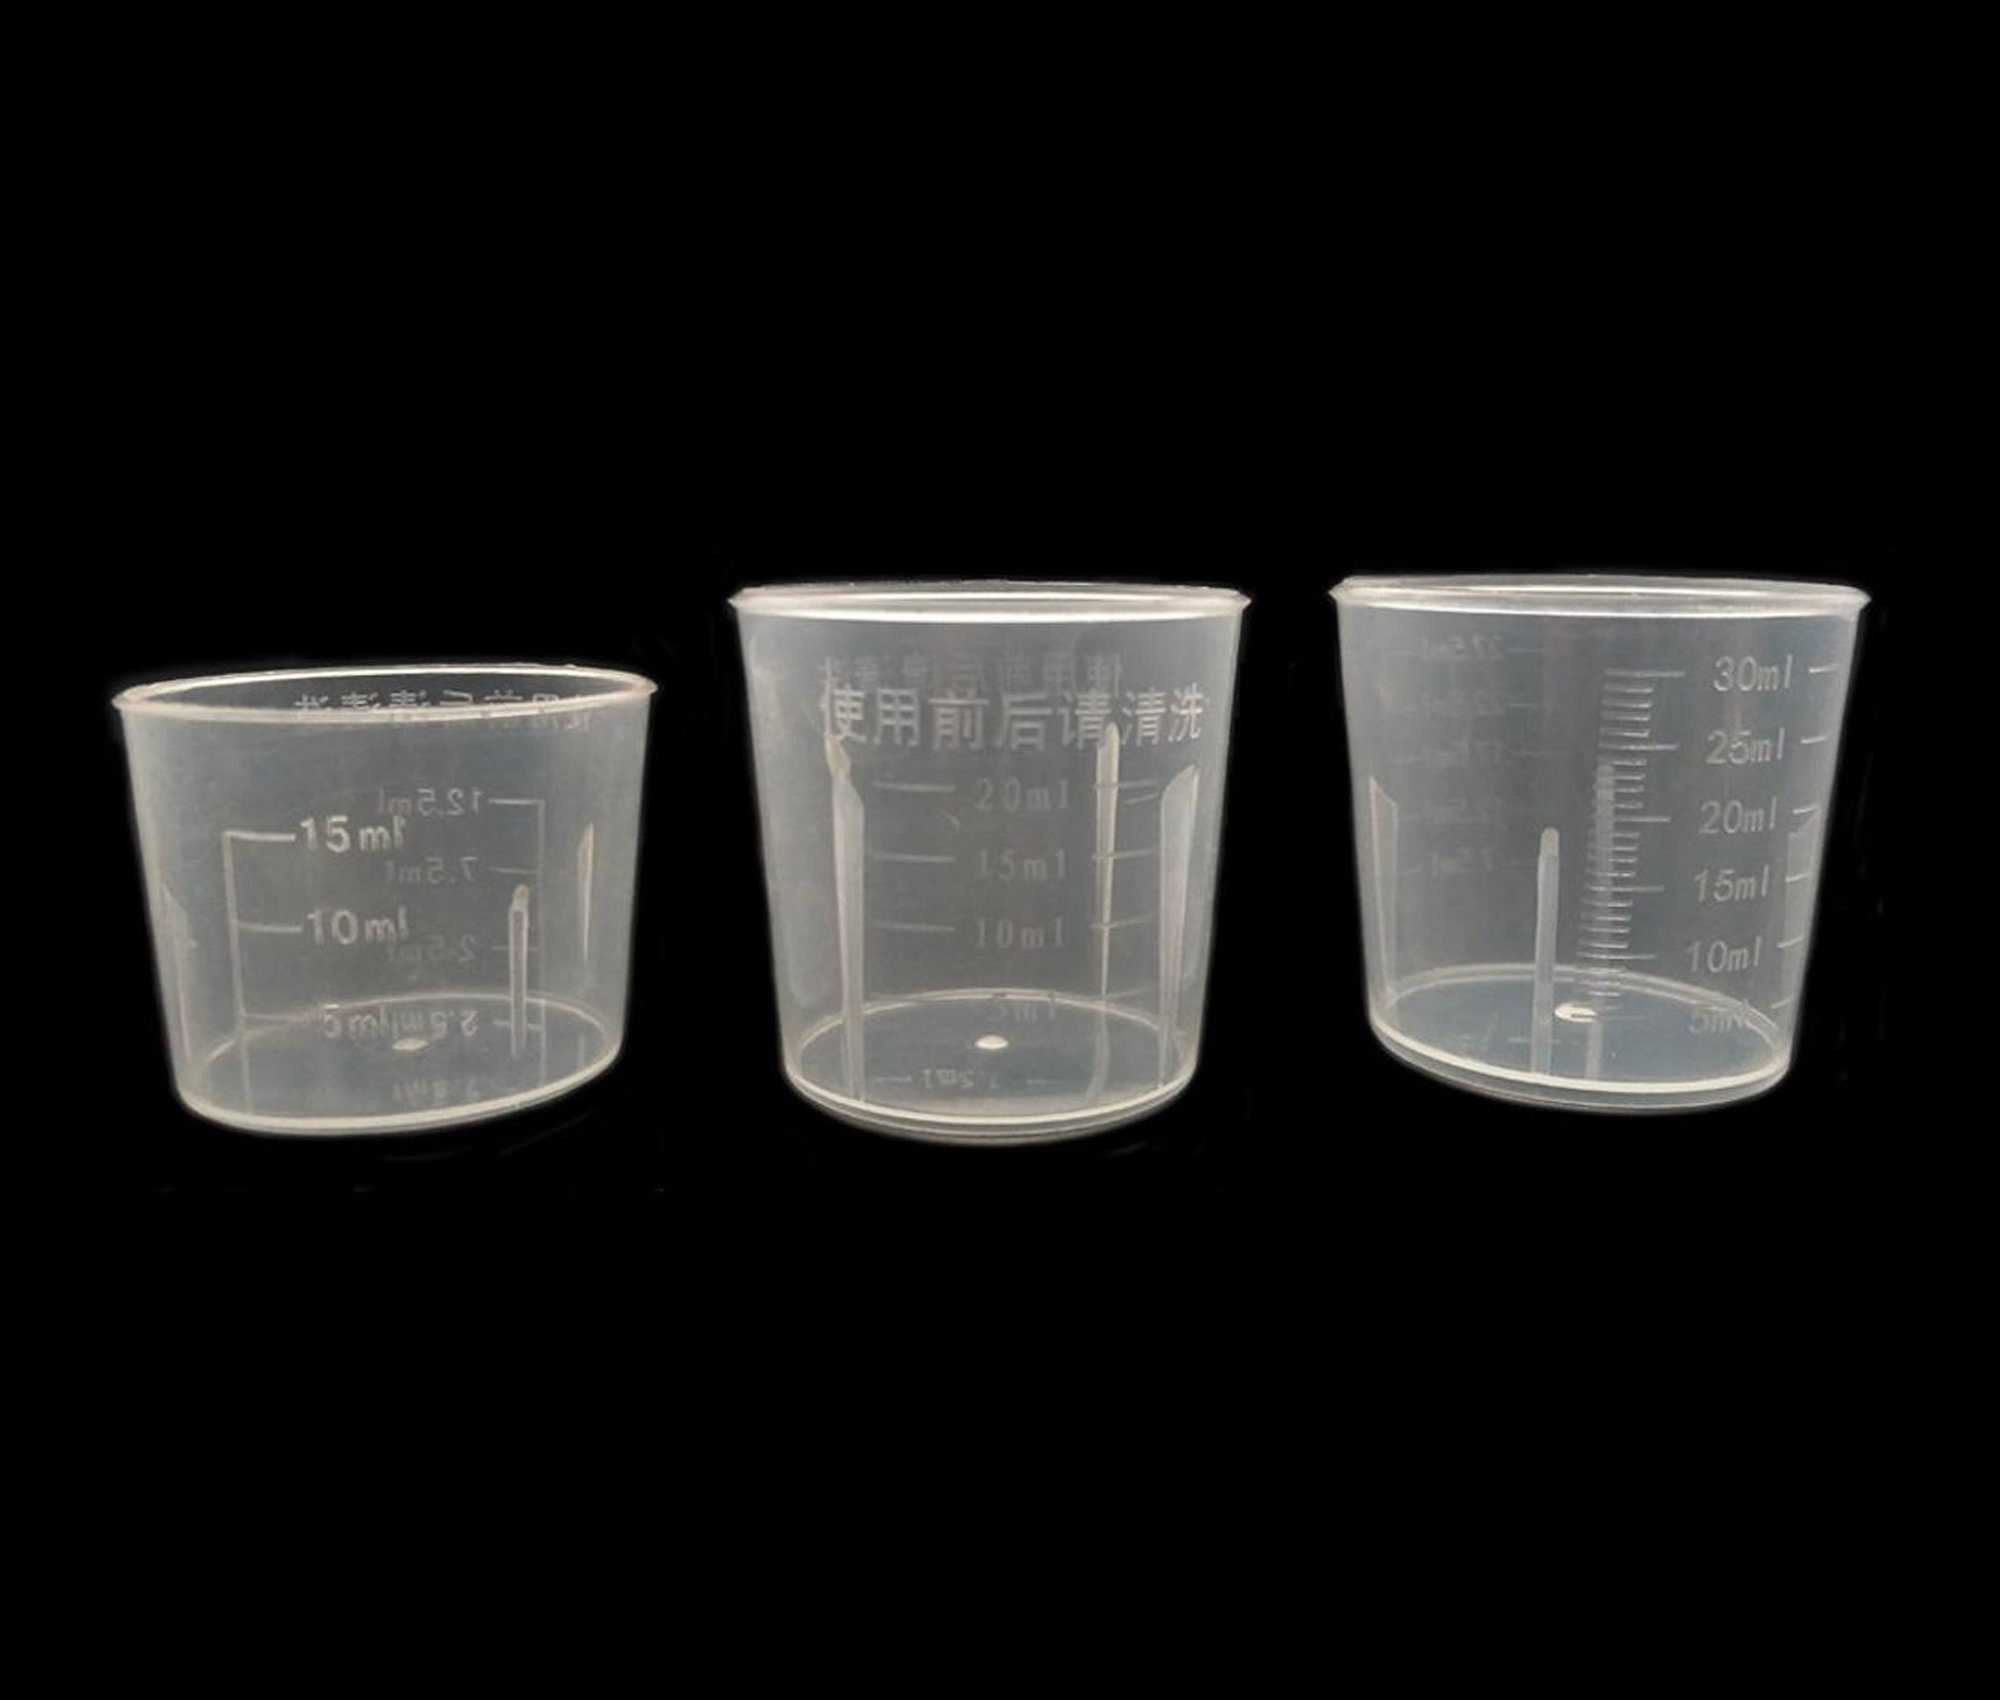 50ml 1000ml Silicone Measuring Cup Water Milk Oil Wine Liquid Container  With Scales Baking Cooking Tools 